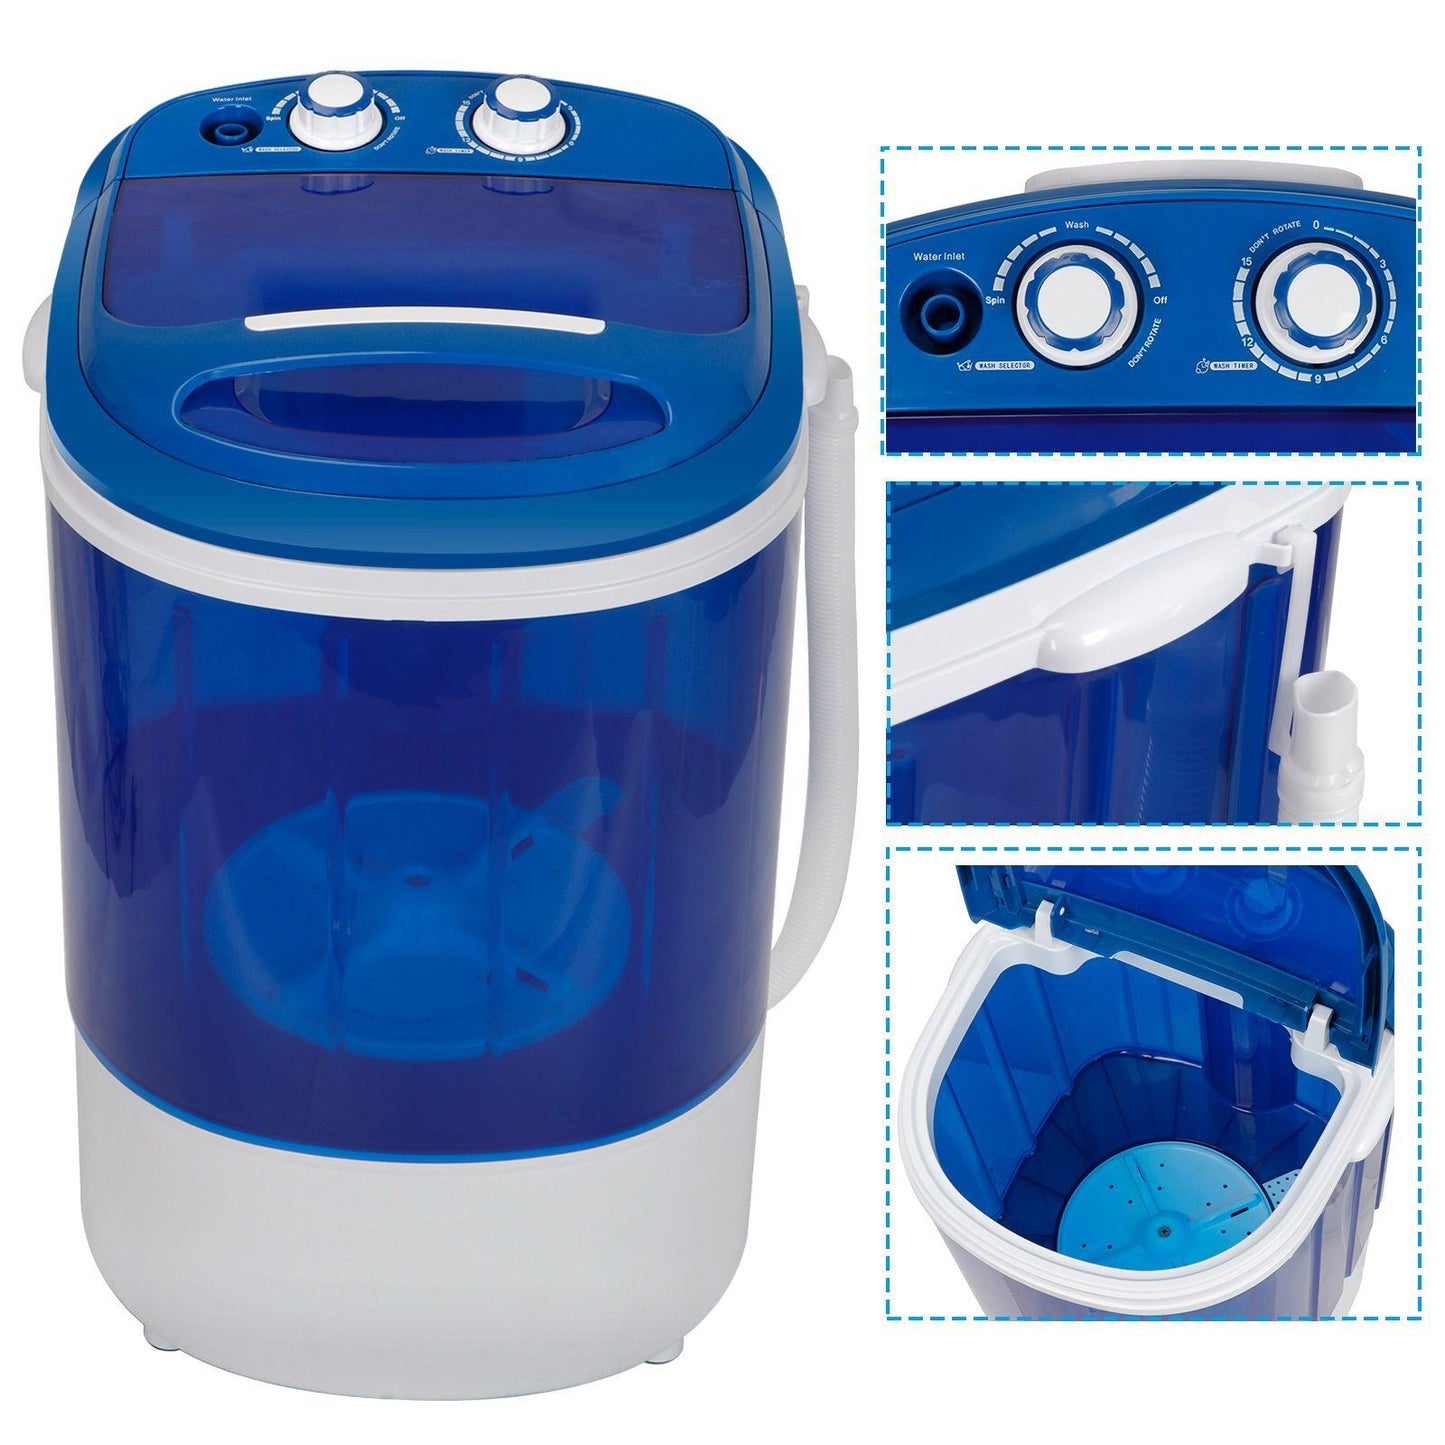 7.9 lbs Portable Compact Mini Washing Machine Laundry Washer Idea for Dorm Rooms